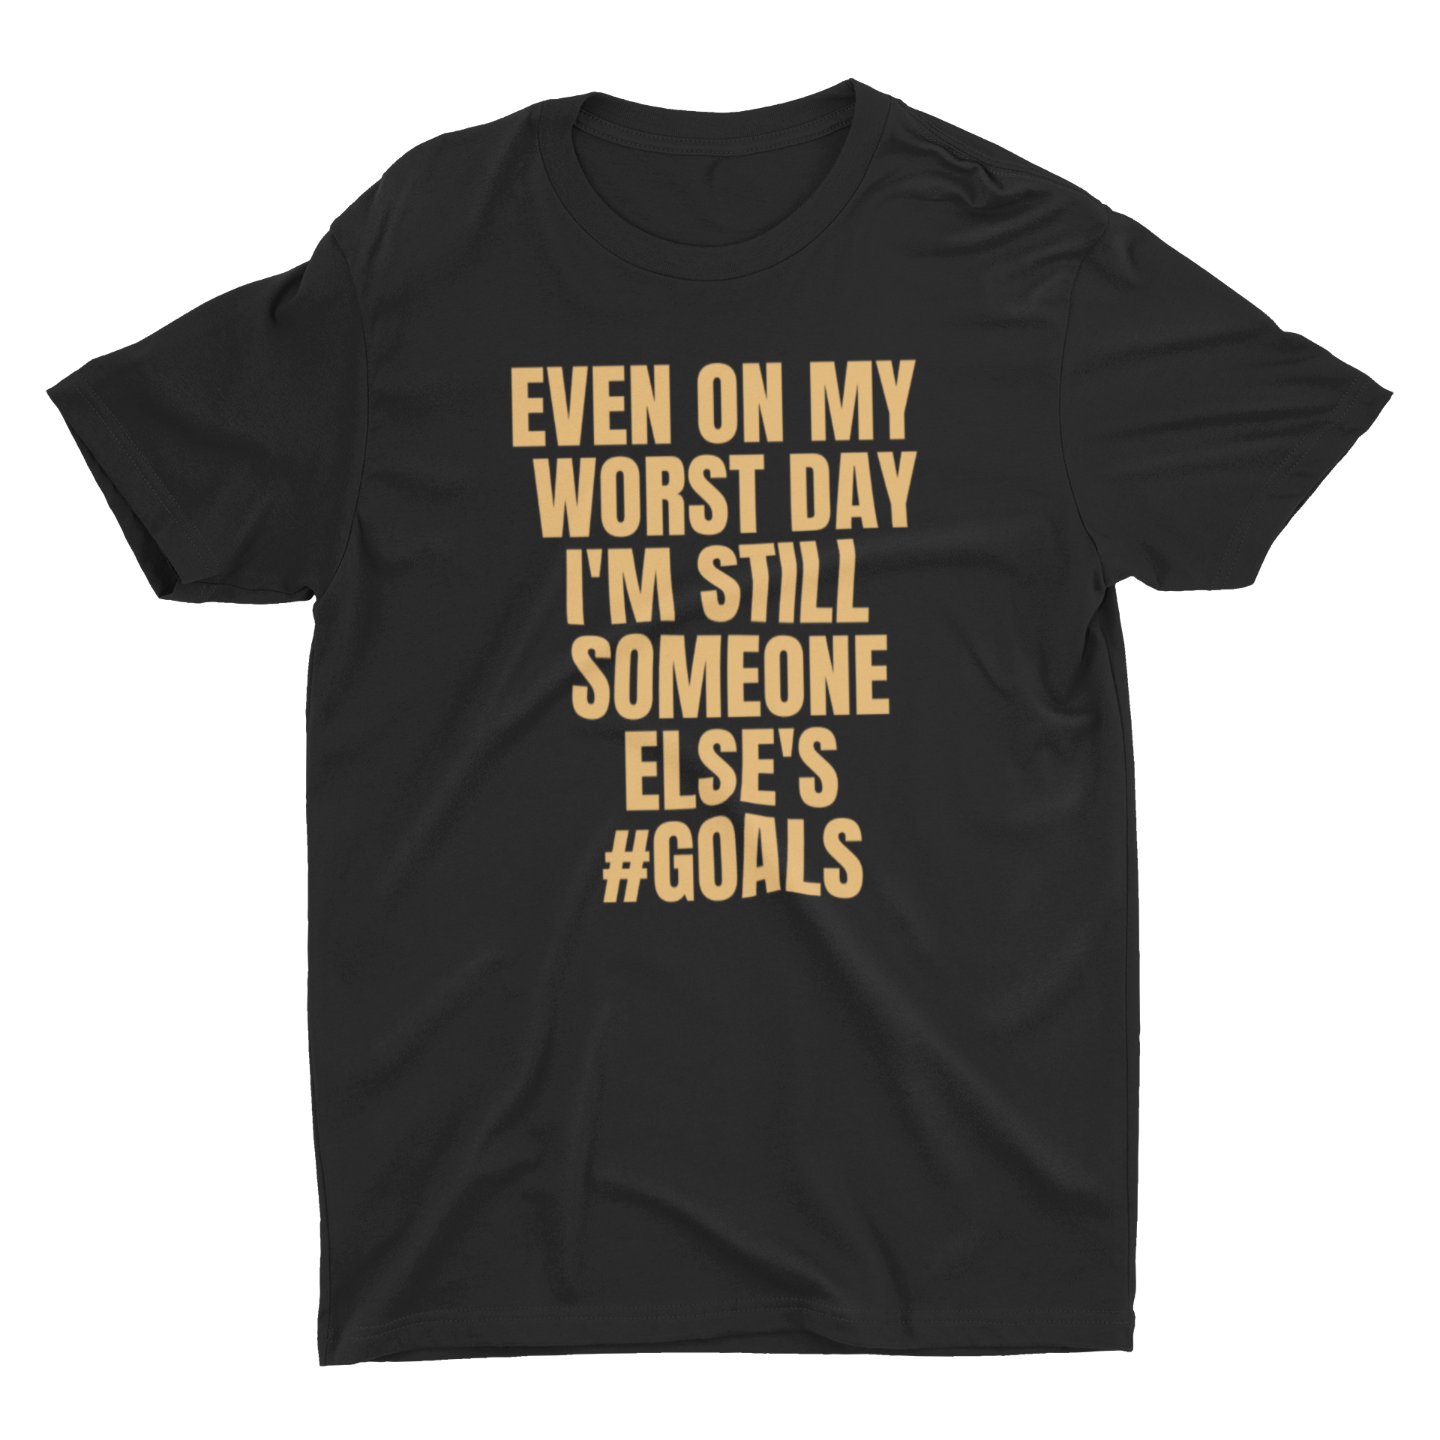 EVEN ON MY WORST DAY - T-Shirt (BLACK/GOLD)